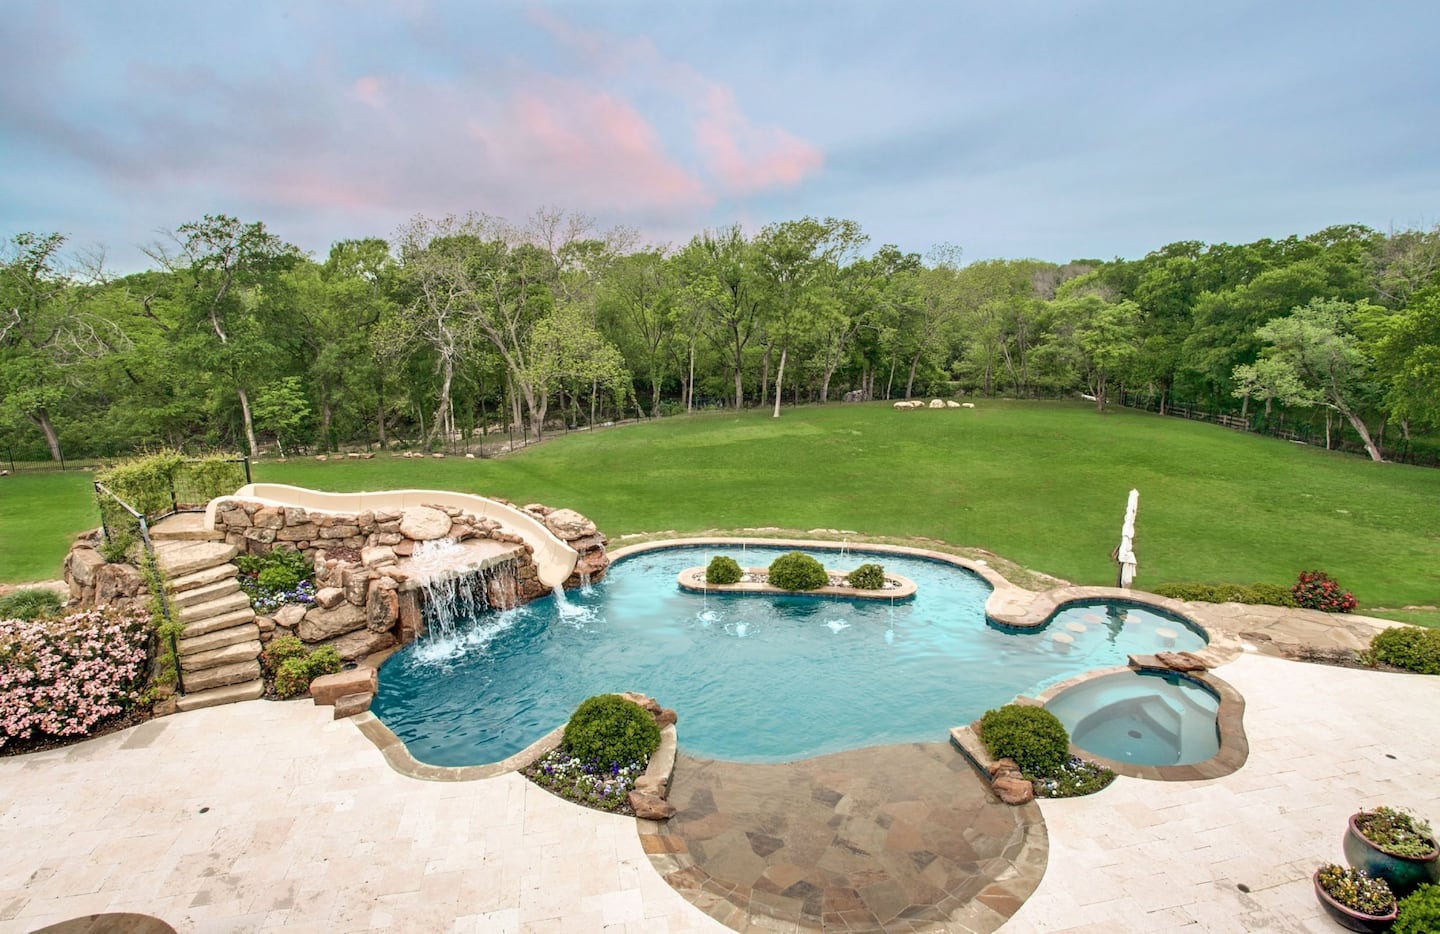 The large, beautiful pool includes a slide and waterfall.